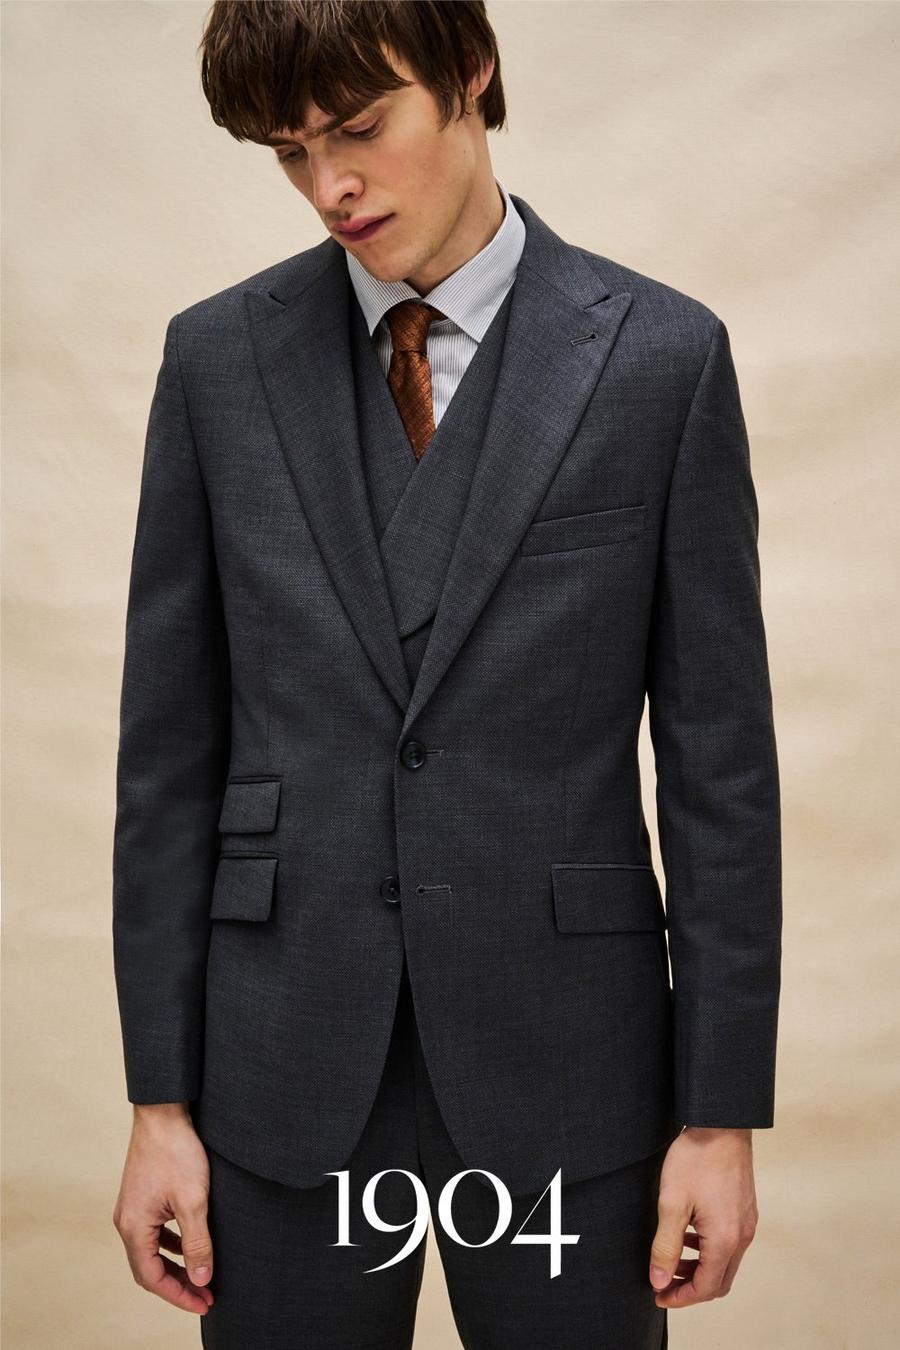 1904 Grey Pindot Tailored Fit Wool Suit Jacket